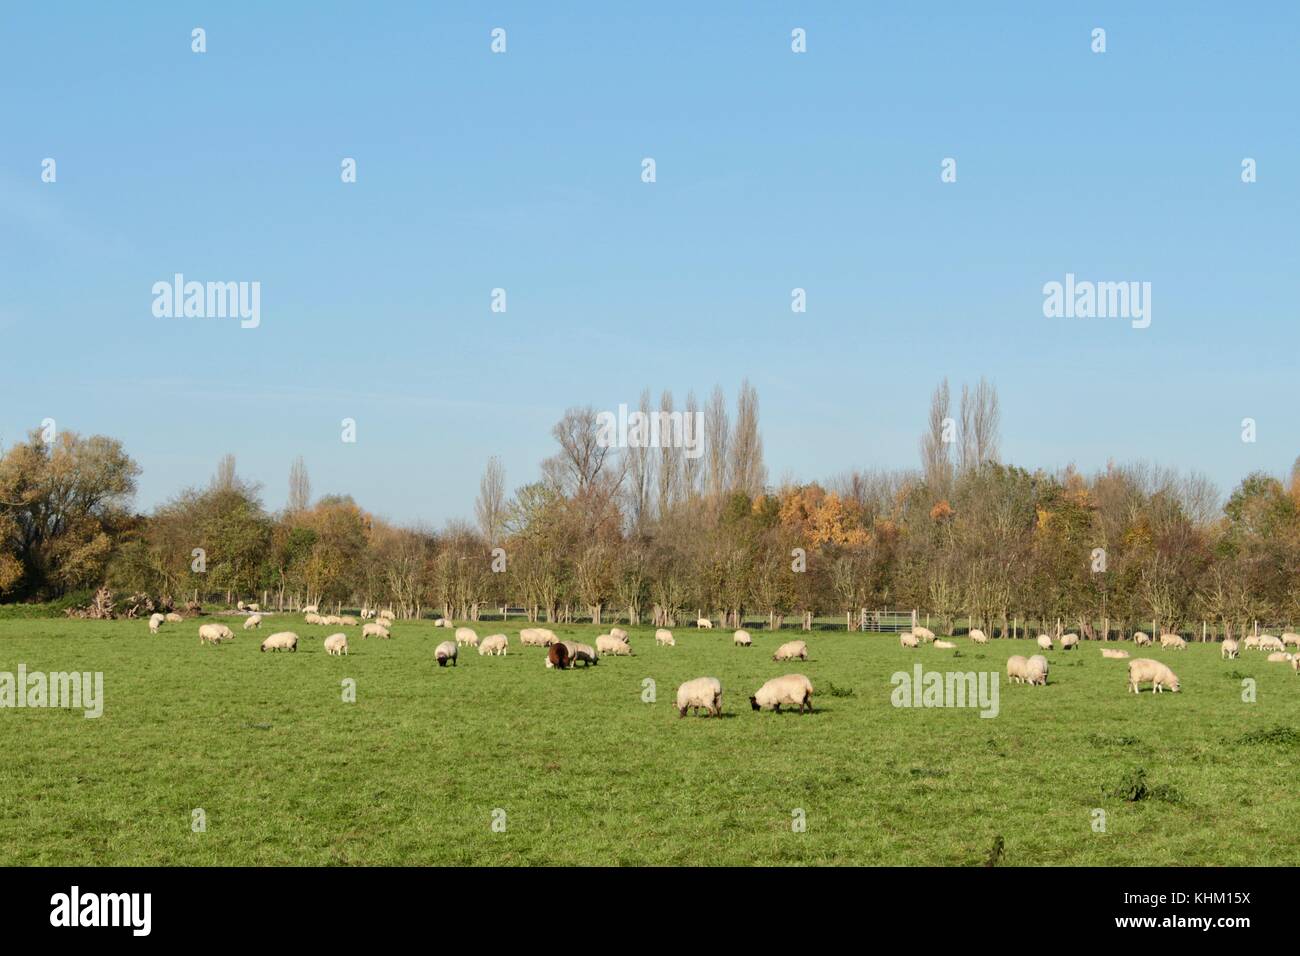 Large flock of sheep grazing in flat field with boundary of wooden fence and trees. Stock Photo